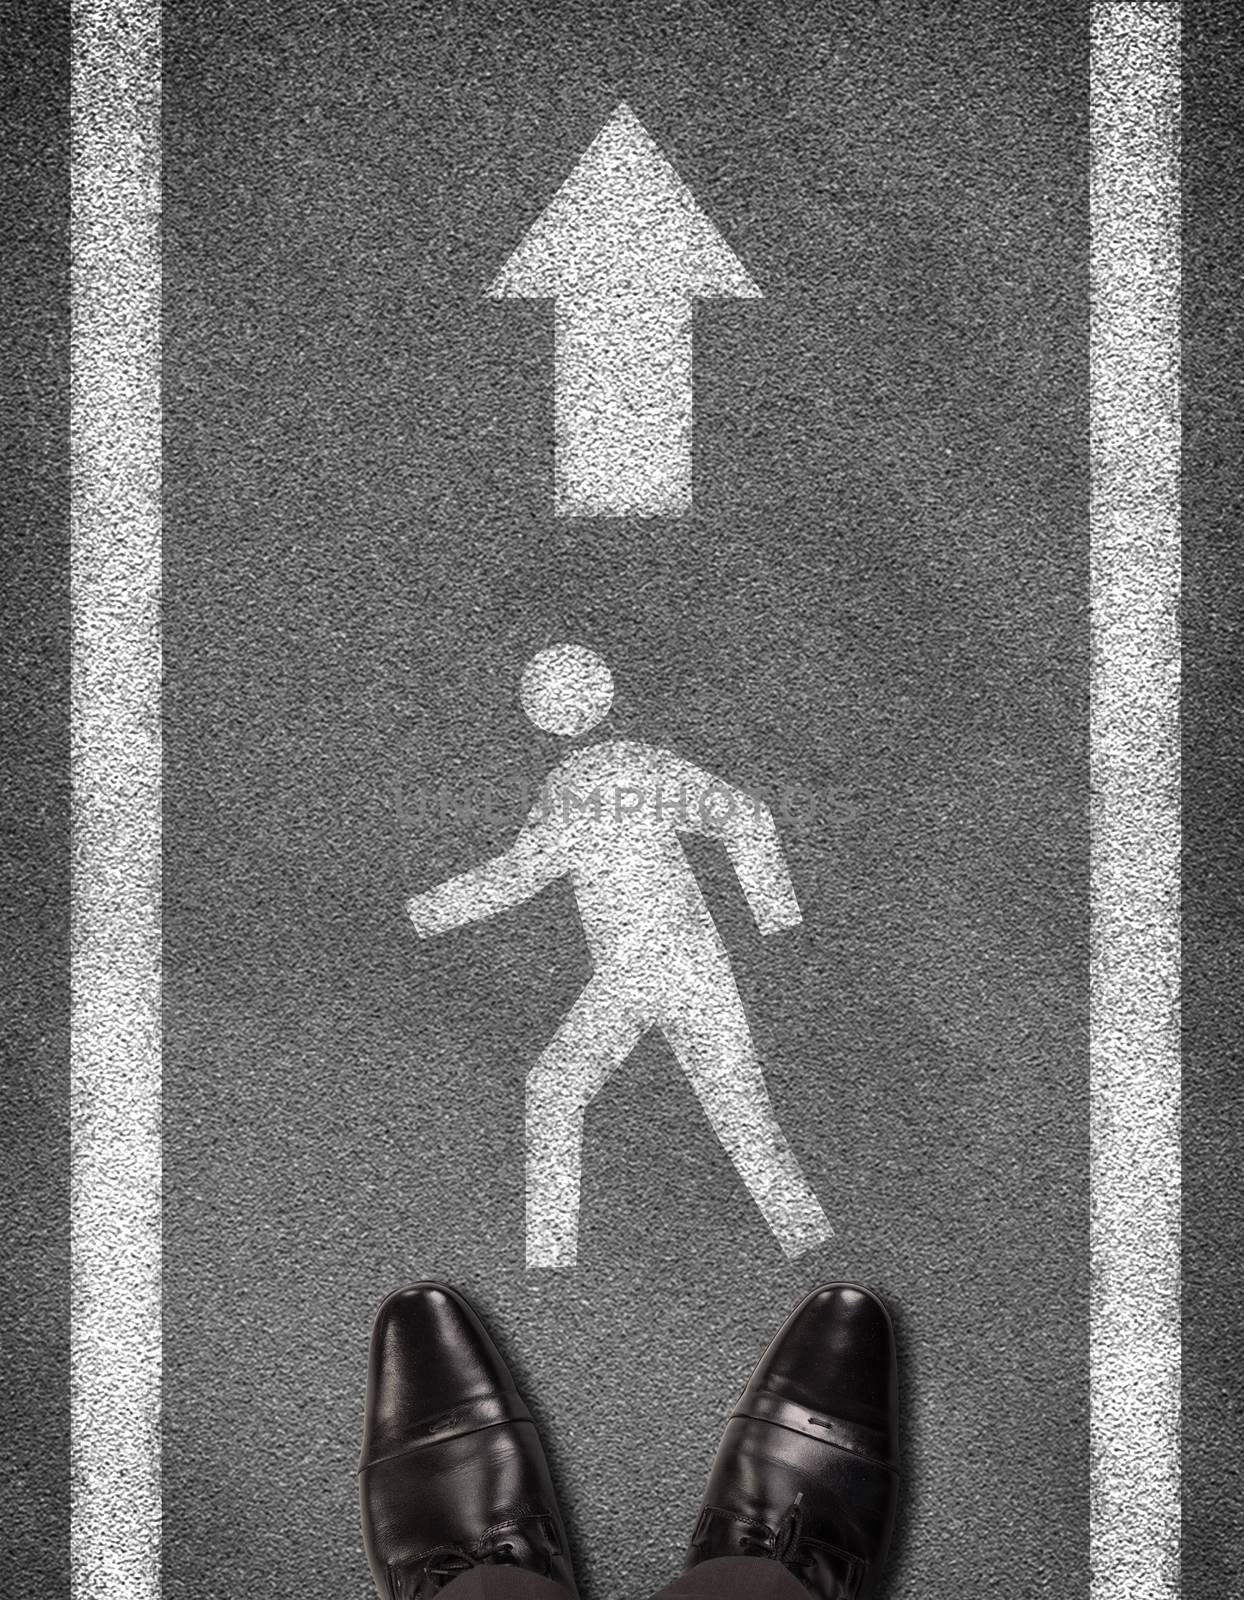 Shoes standing on asphalt road with two line and pedestrian sign by cherezoff